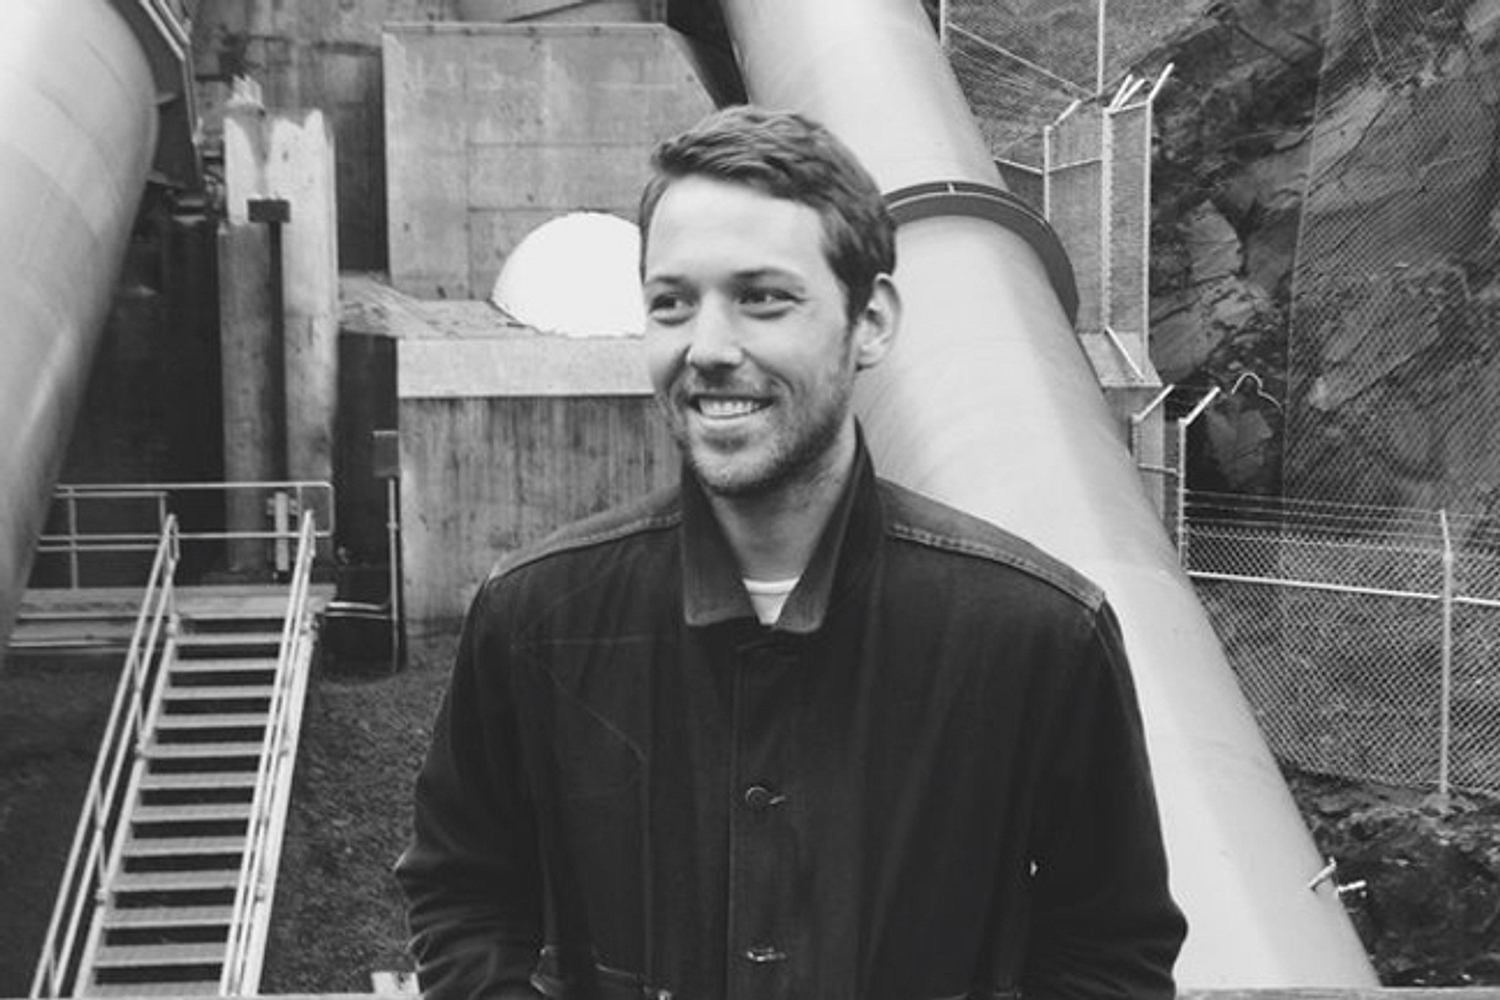 Hear another new song from Robin Pecknold of Fleet Foxes